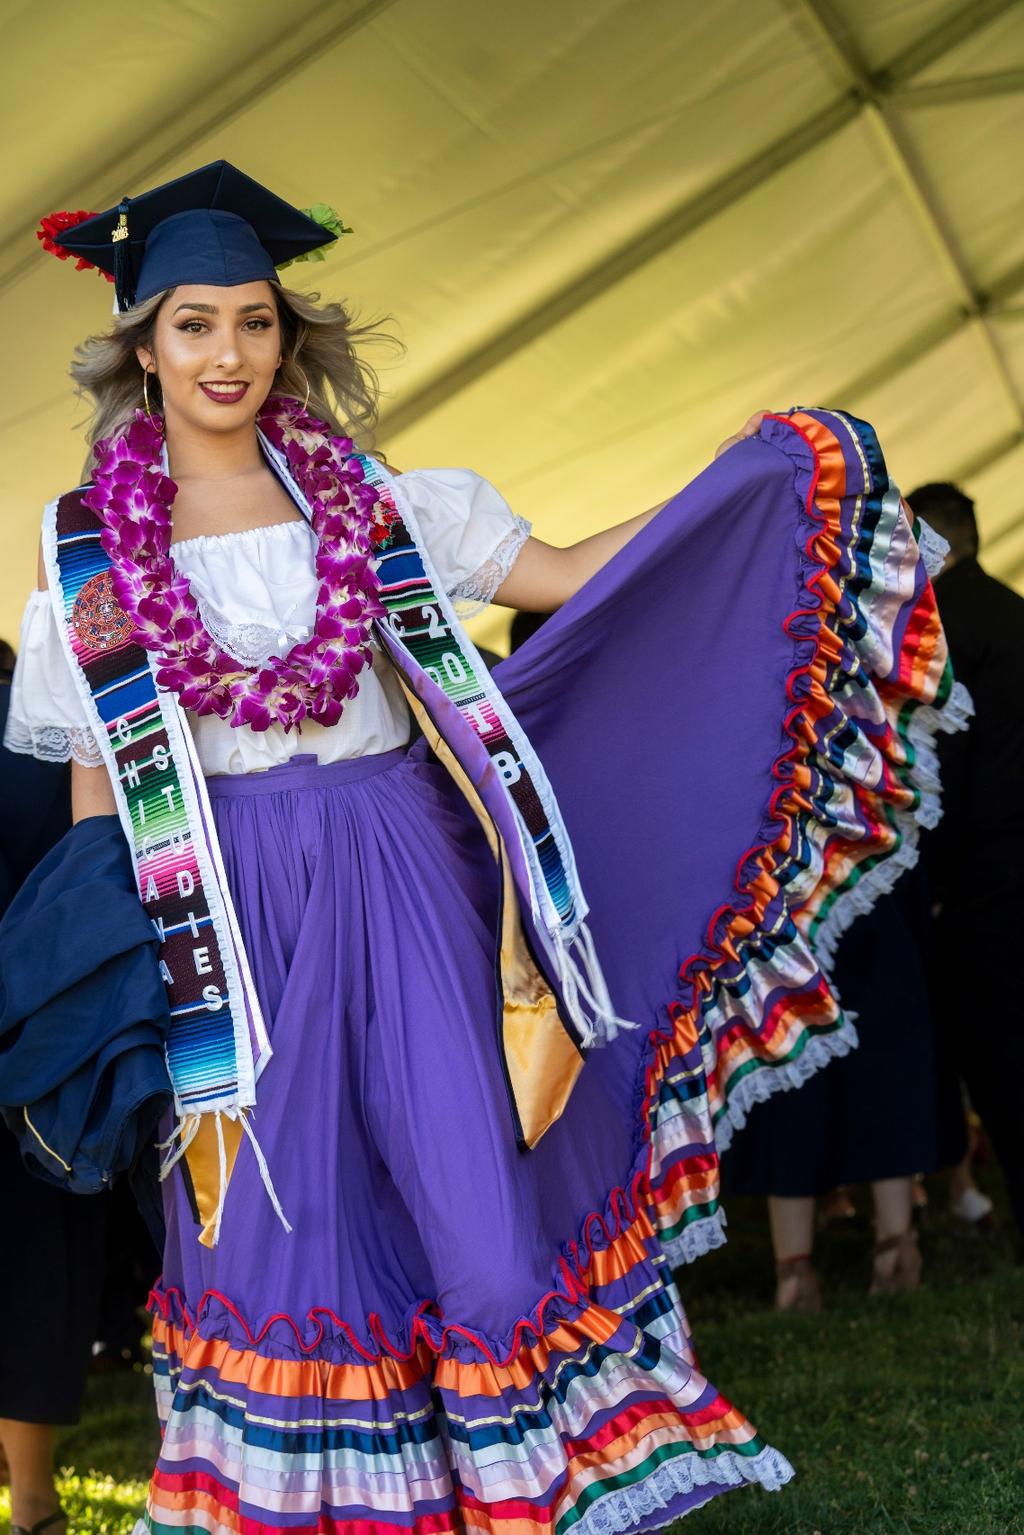 CHICANX STUDENT LIFE Our vibrant Latinx/Chicanx community is one of the defining features of UC Davis.